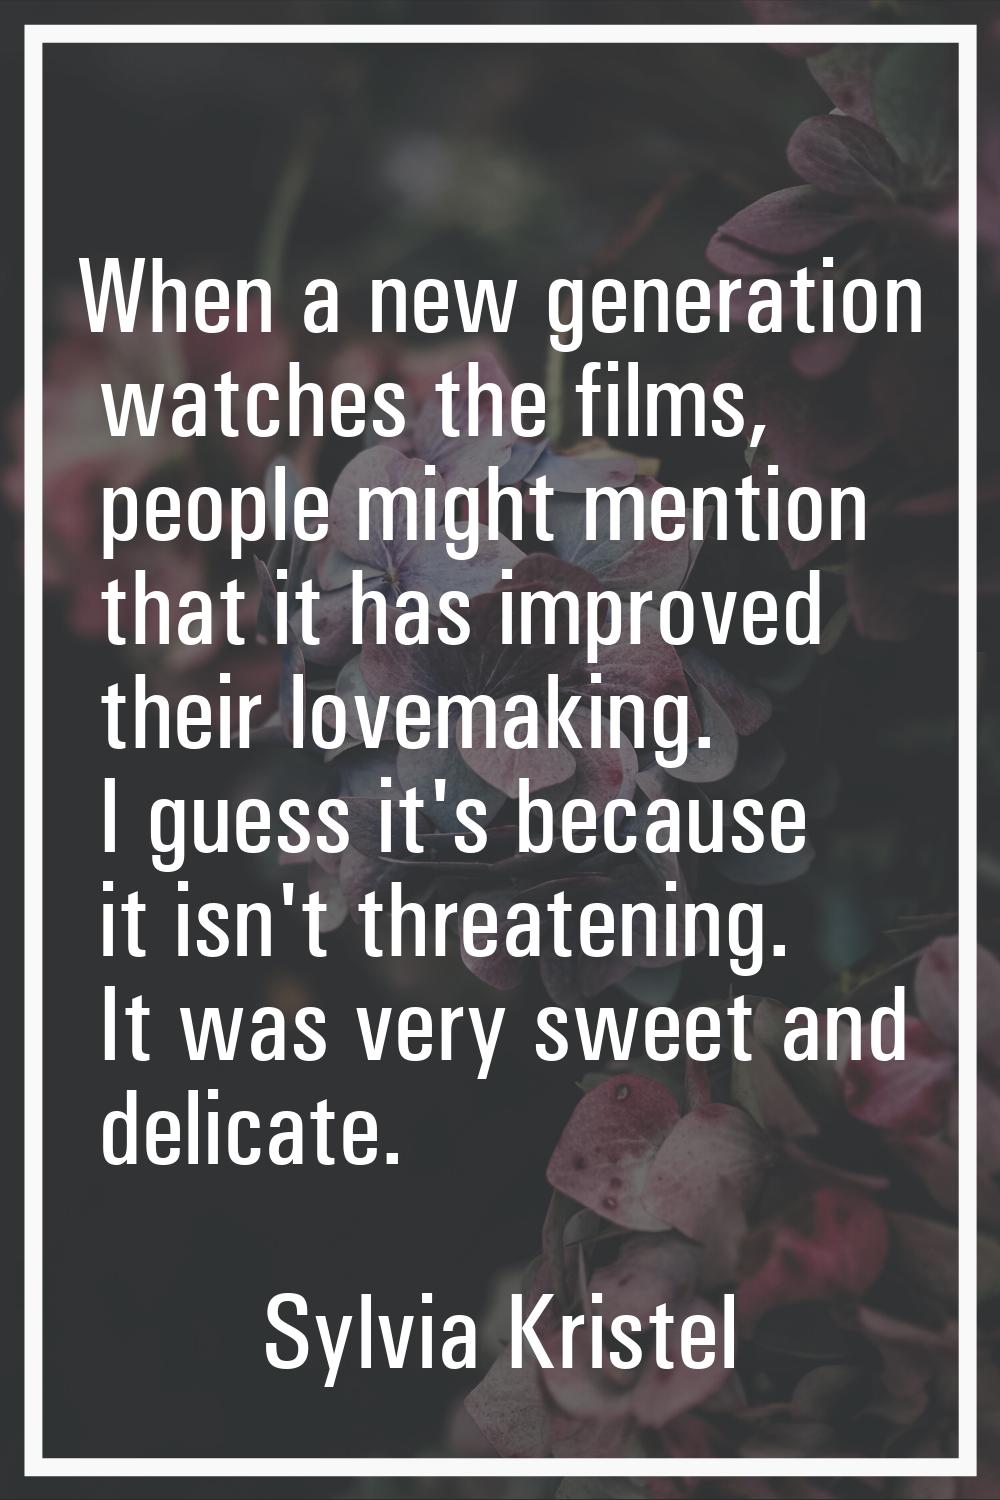 When a new generation watches the films, people might mention that it has improved their lovemaking